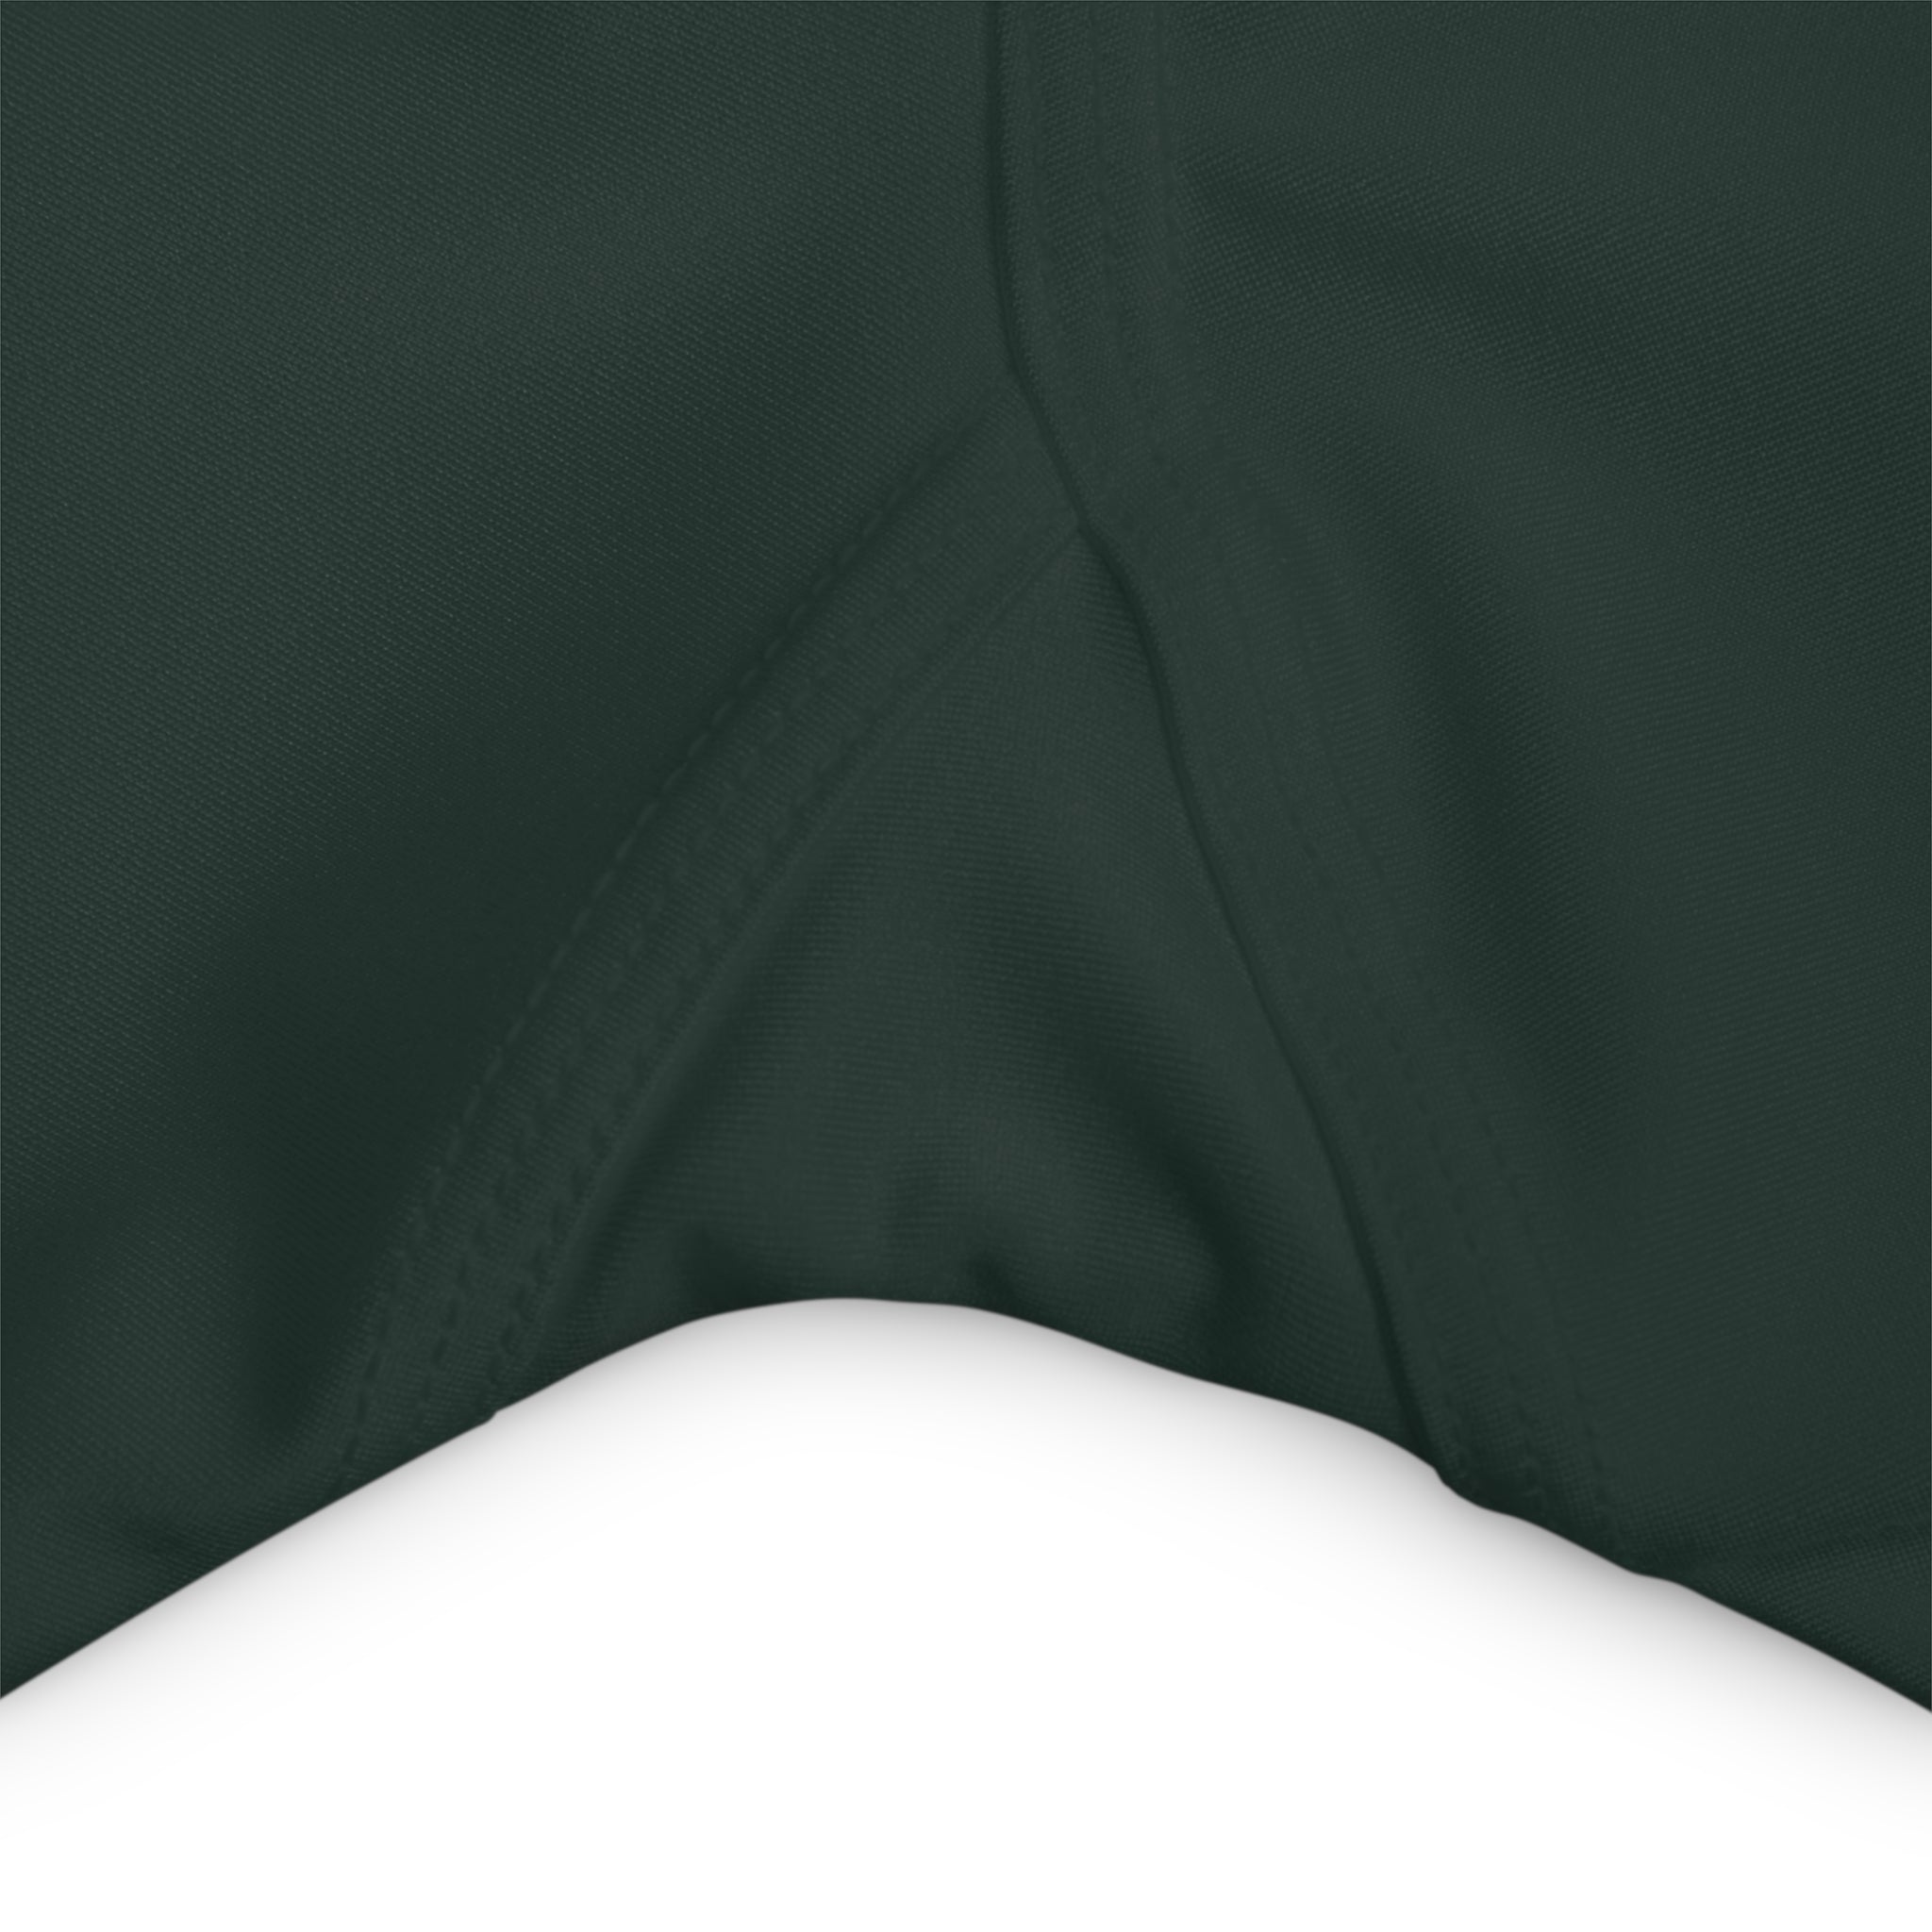 Forrest Green High Waisted Yoga Shorts